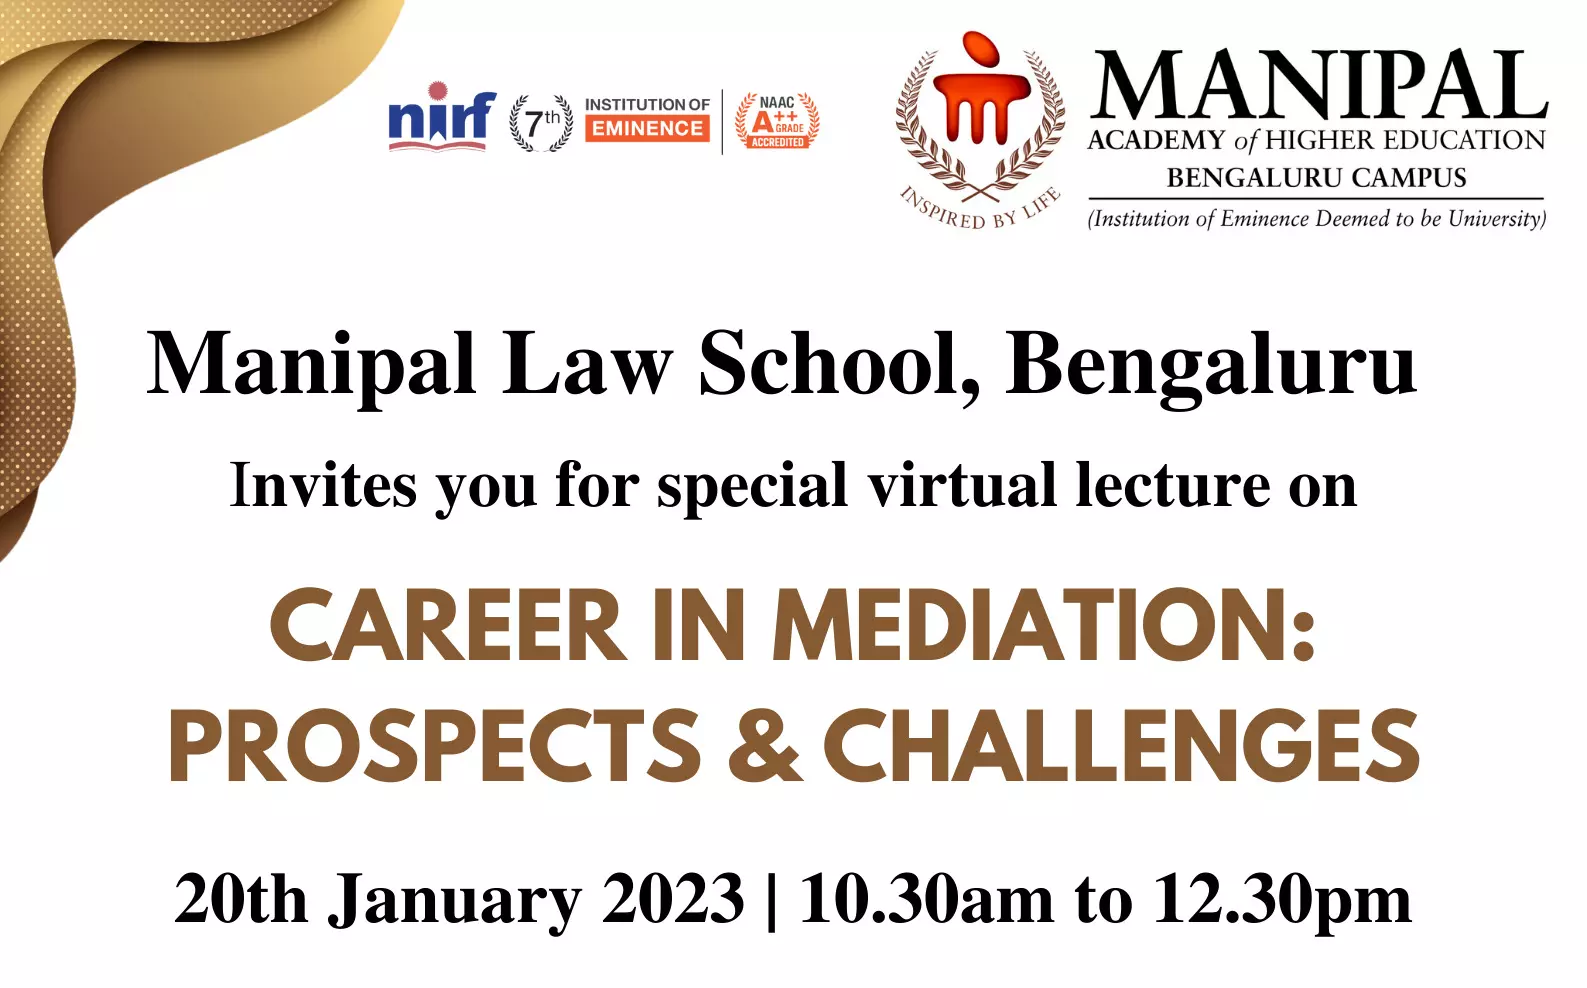 Virtual Lecture on Career in Mediation: Prospects & Challenges By Manipal Law School, Bengaluru | 20th January 2023